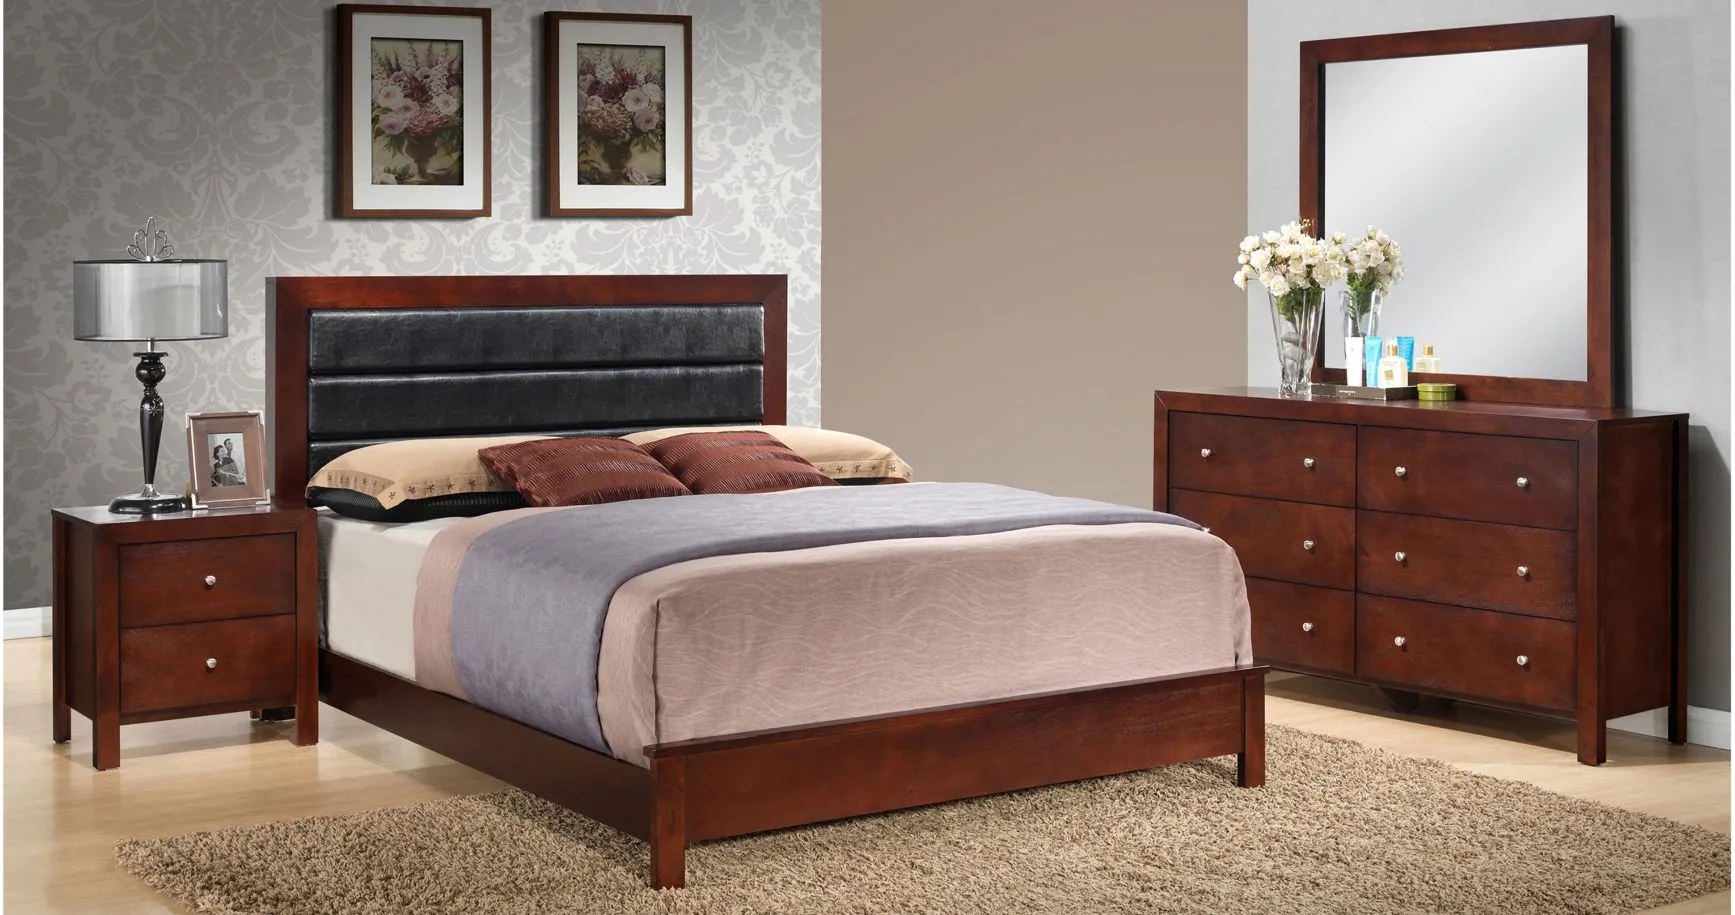 Burlington 4-pc. Upholstered Bedroom Set in Cherry by Glory Furniture